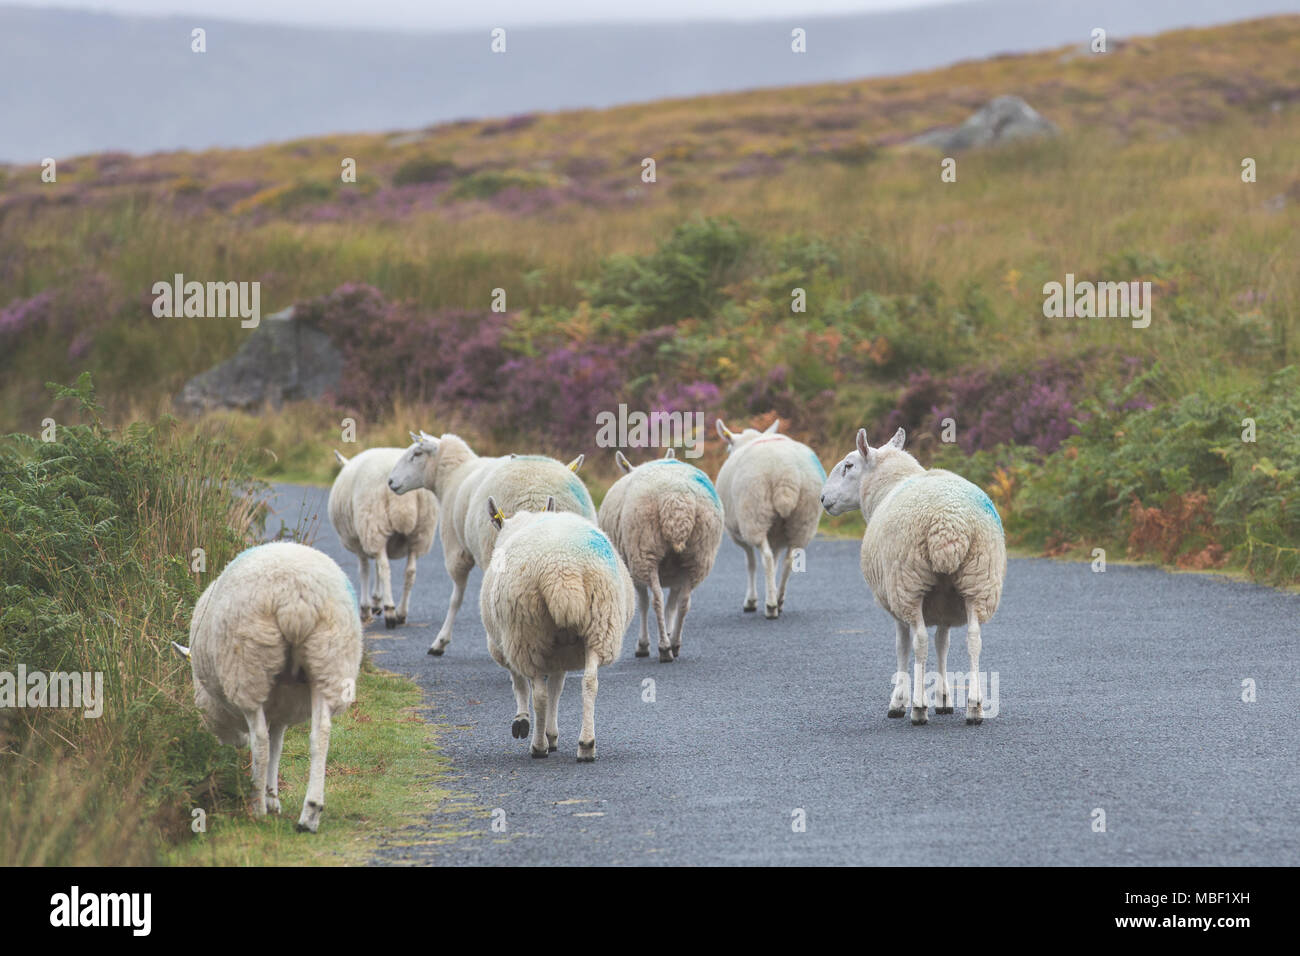 Sheep on a road in Ireland Stock Photo